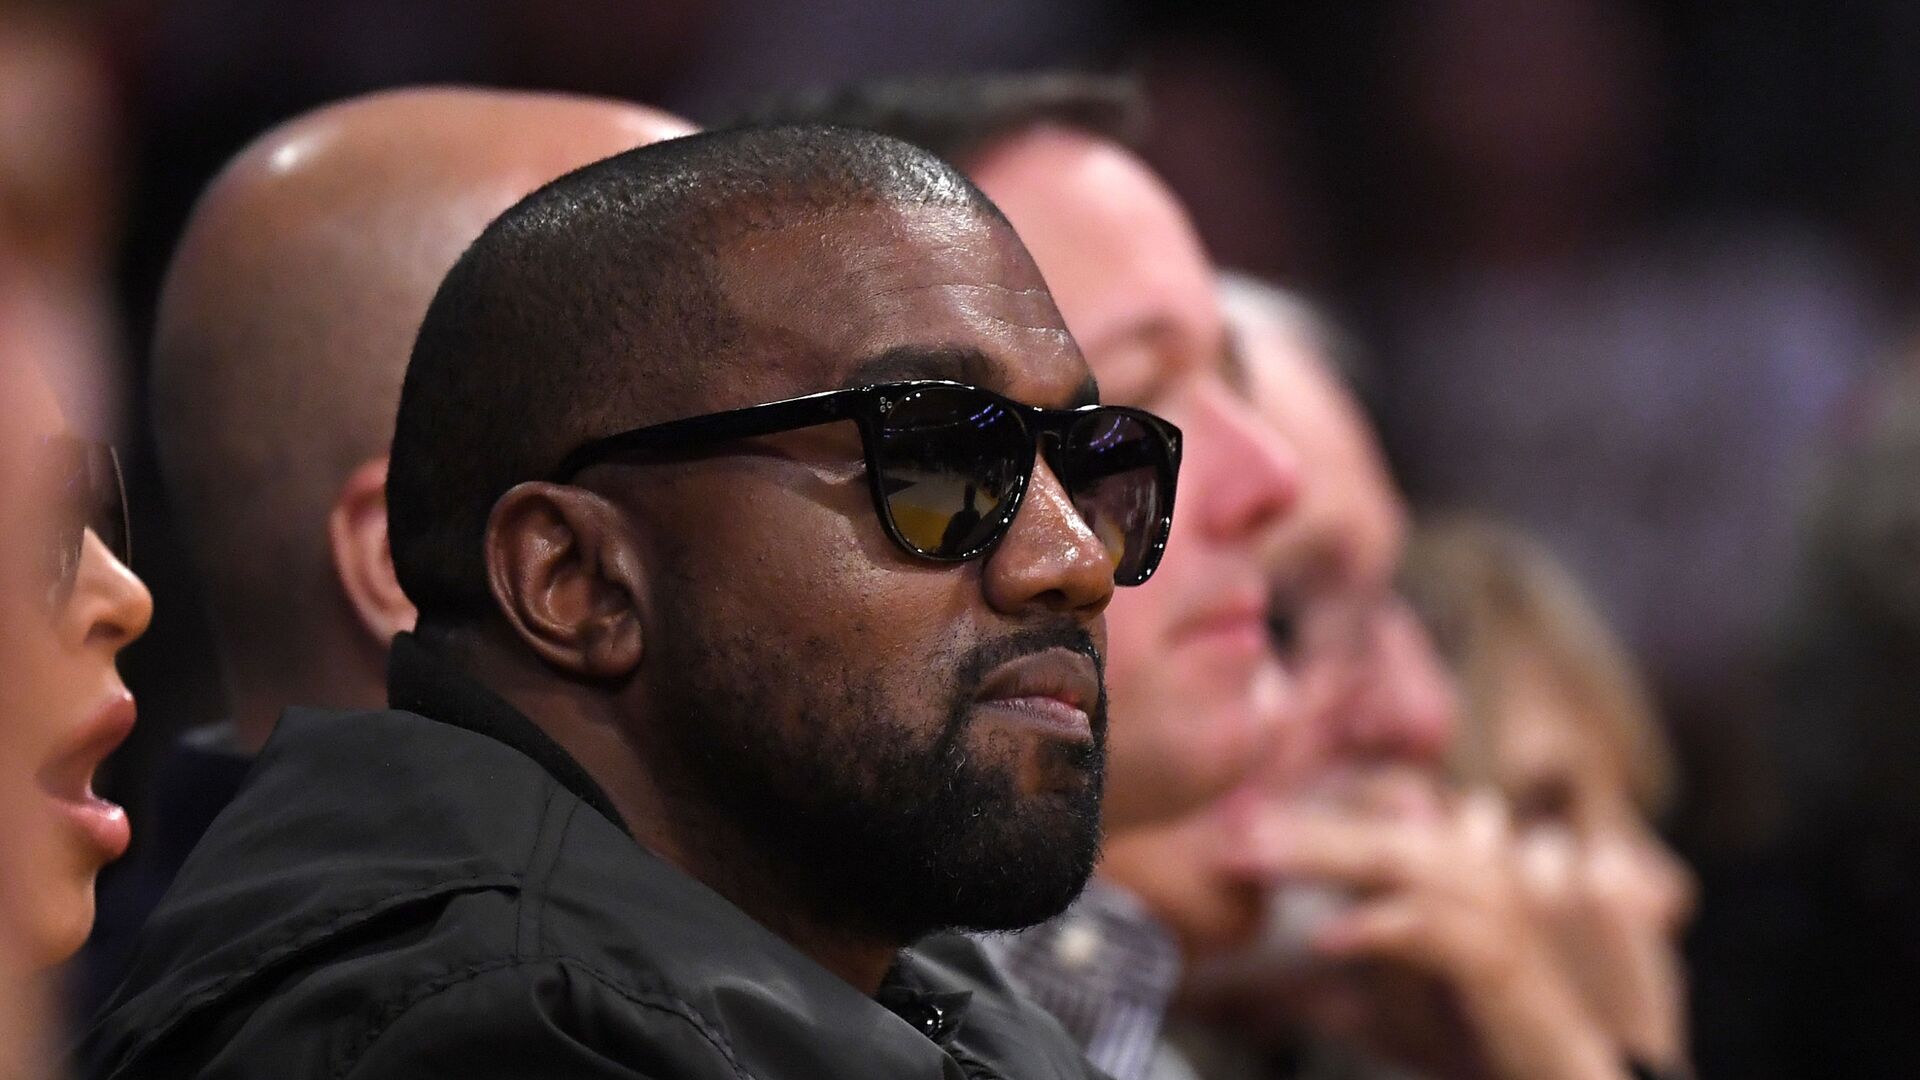 In this Jan. 13, 2020 file photo, Rapper Kanye West watches during the second half of an NBA basketball game between the Los Angeles Lakers and the Cleveland Cavaliers in Los Angeles. Drawings by West from when the rapper was a high school student in Chicago are now worth thousands of dollars, according to an appraiser. - Sputnik International, 1920, 17.03.2022